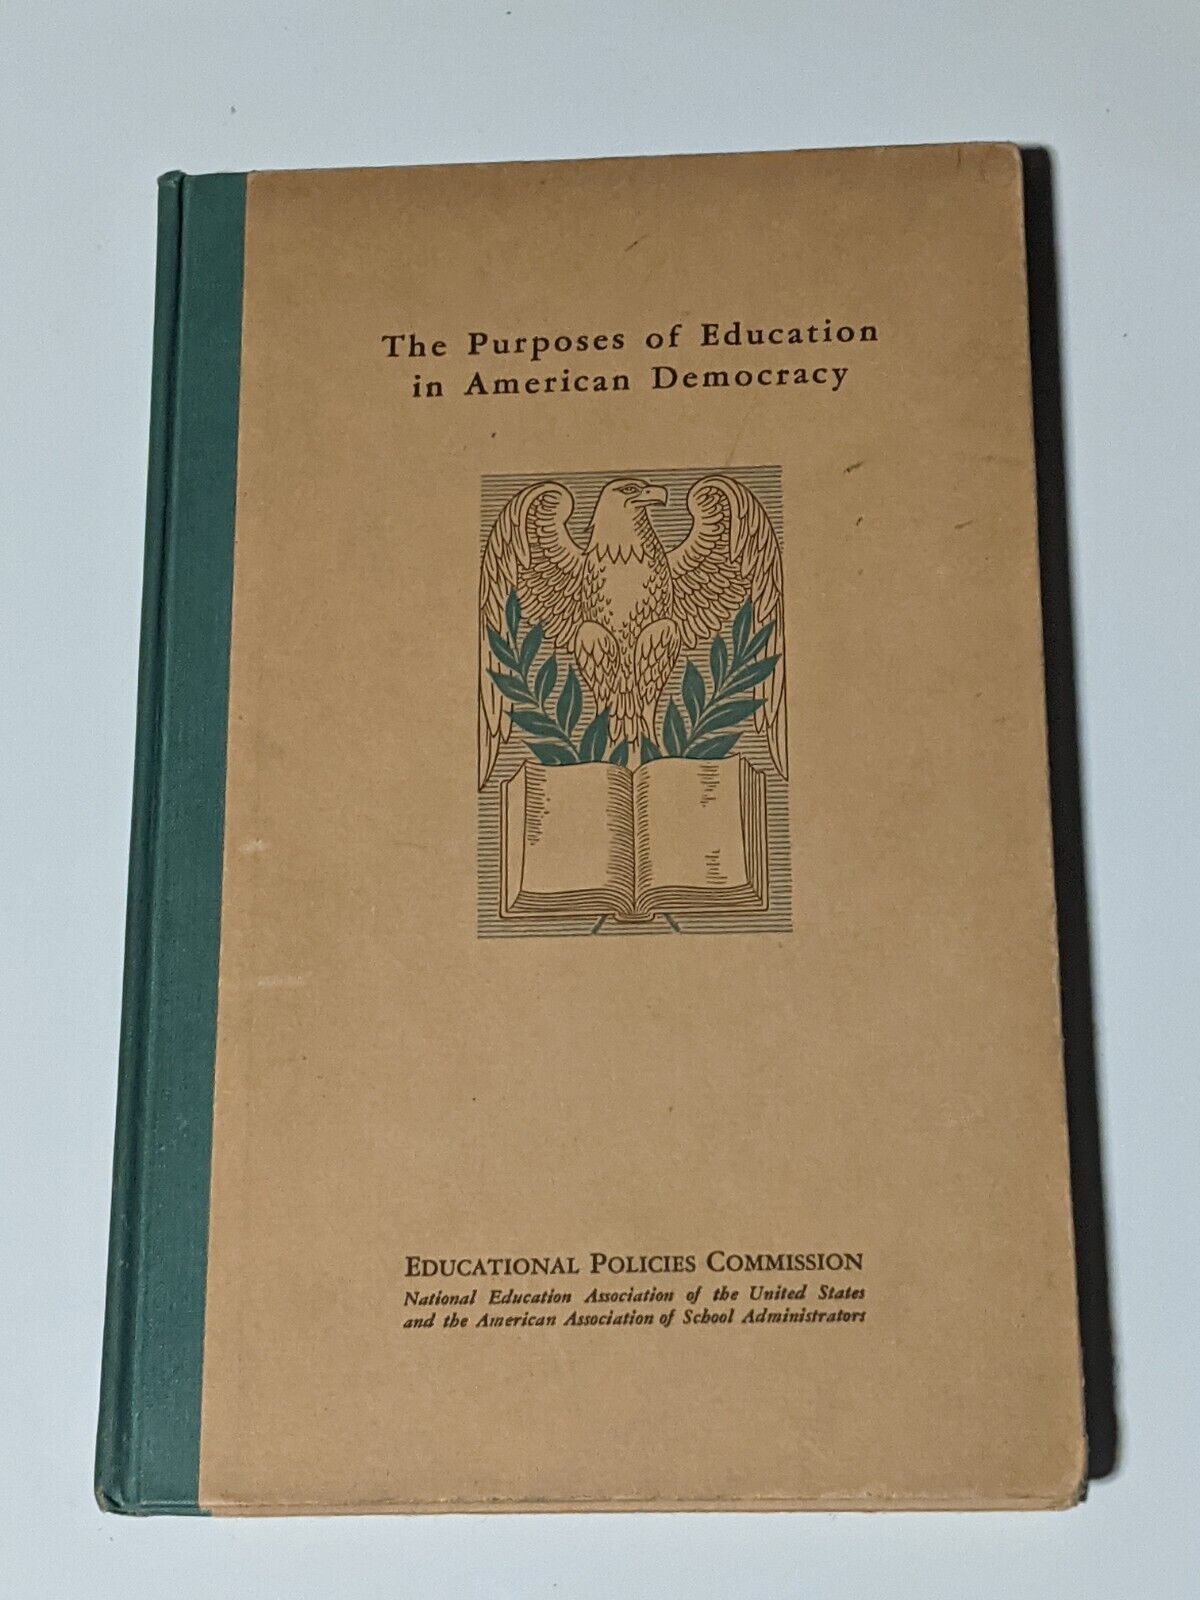 Vintage 1939 The Purposes of Education in American Democracy Hardcover